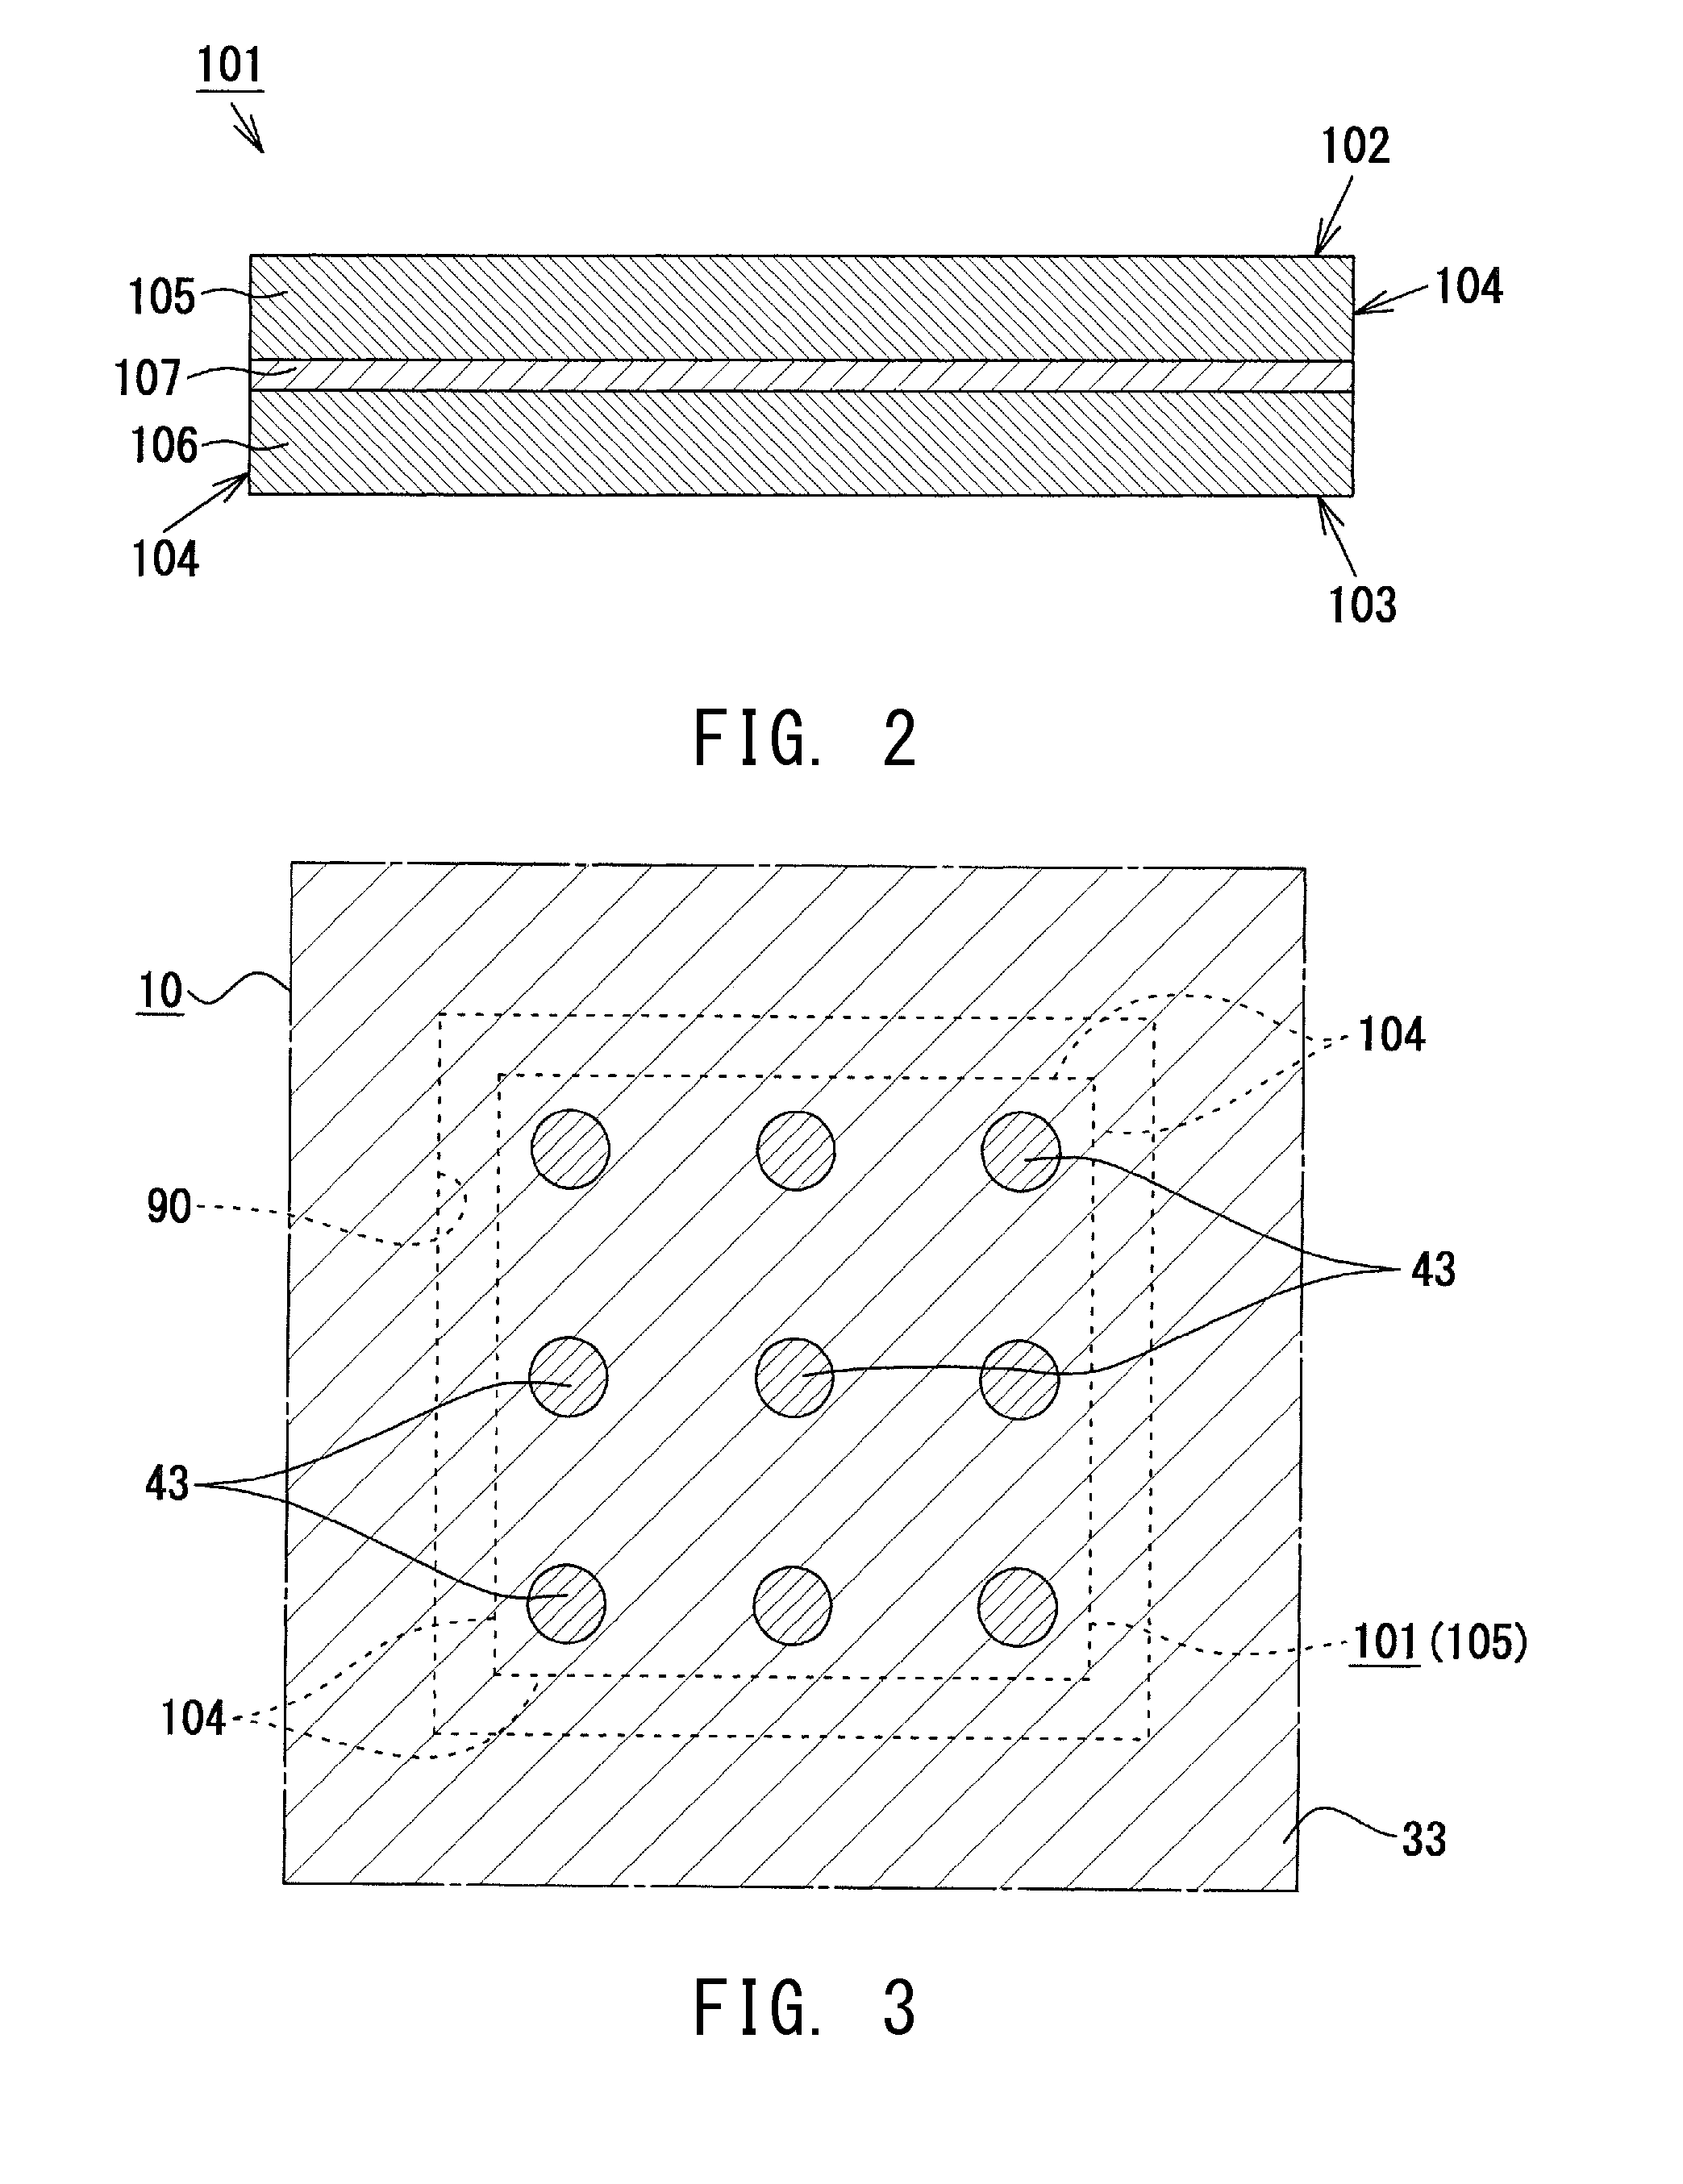 Multilayered wiring substrate